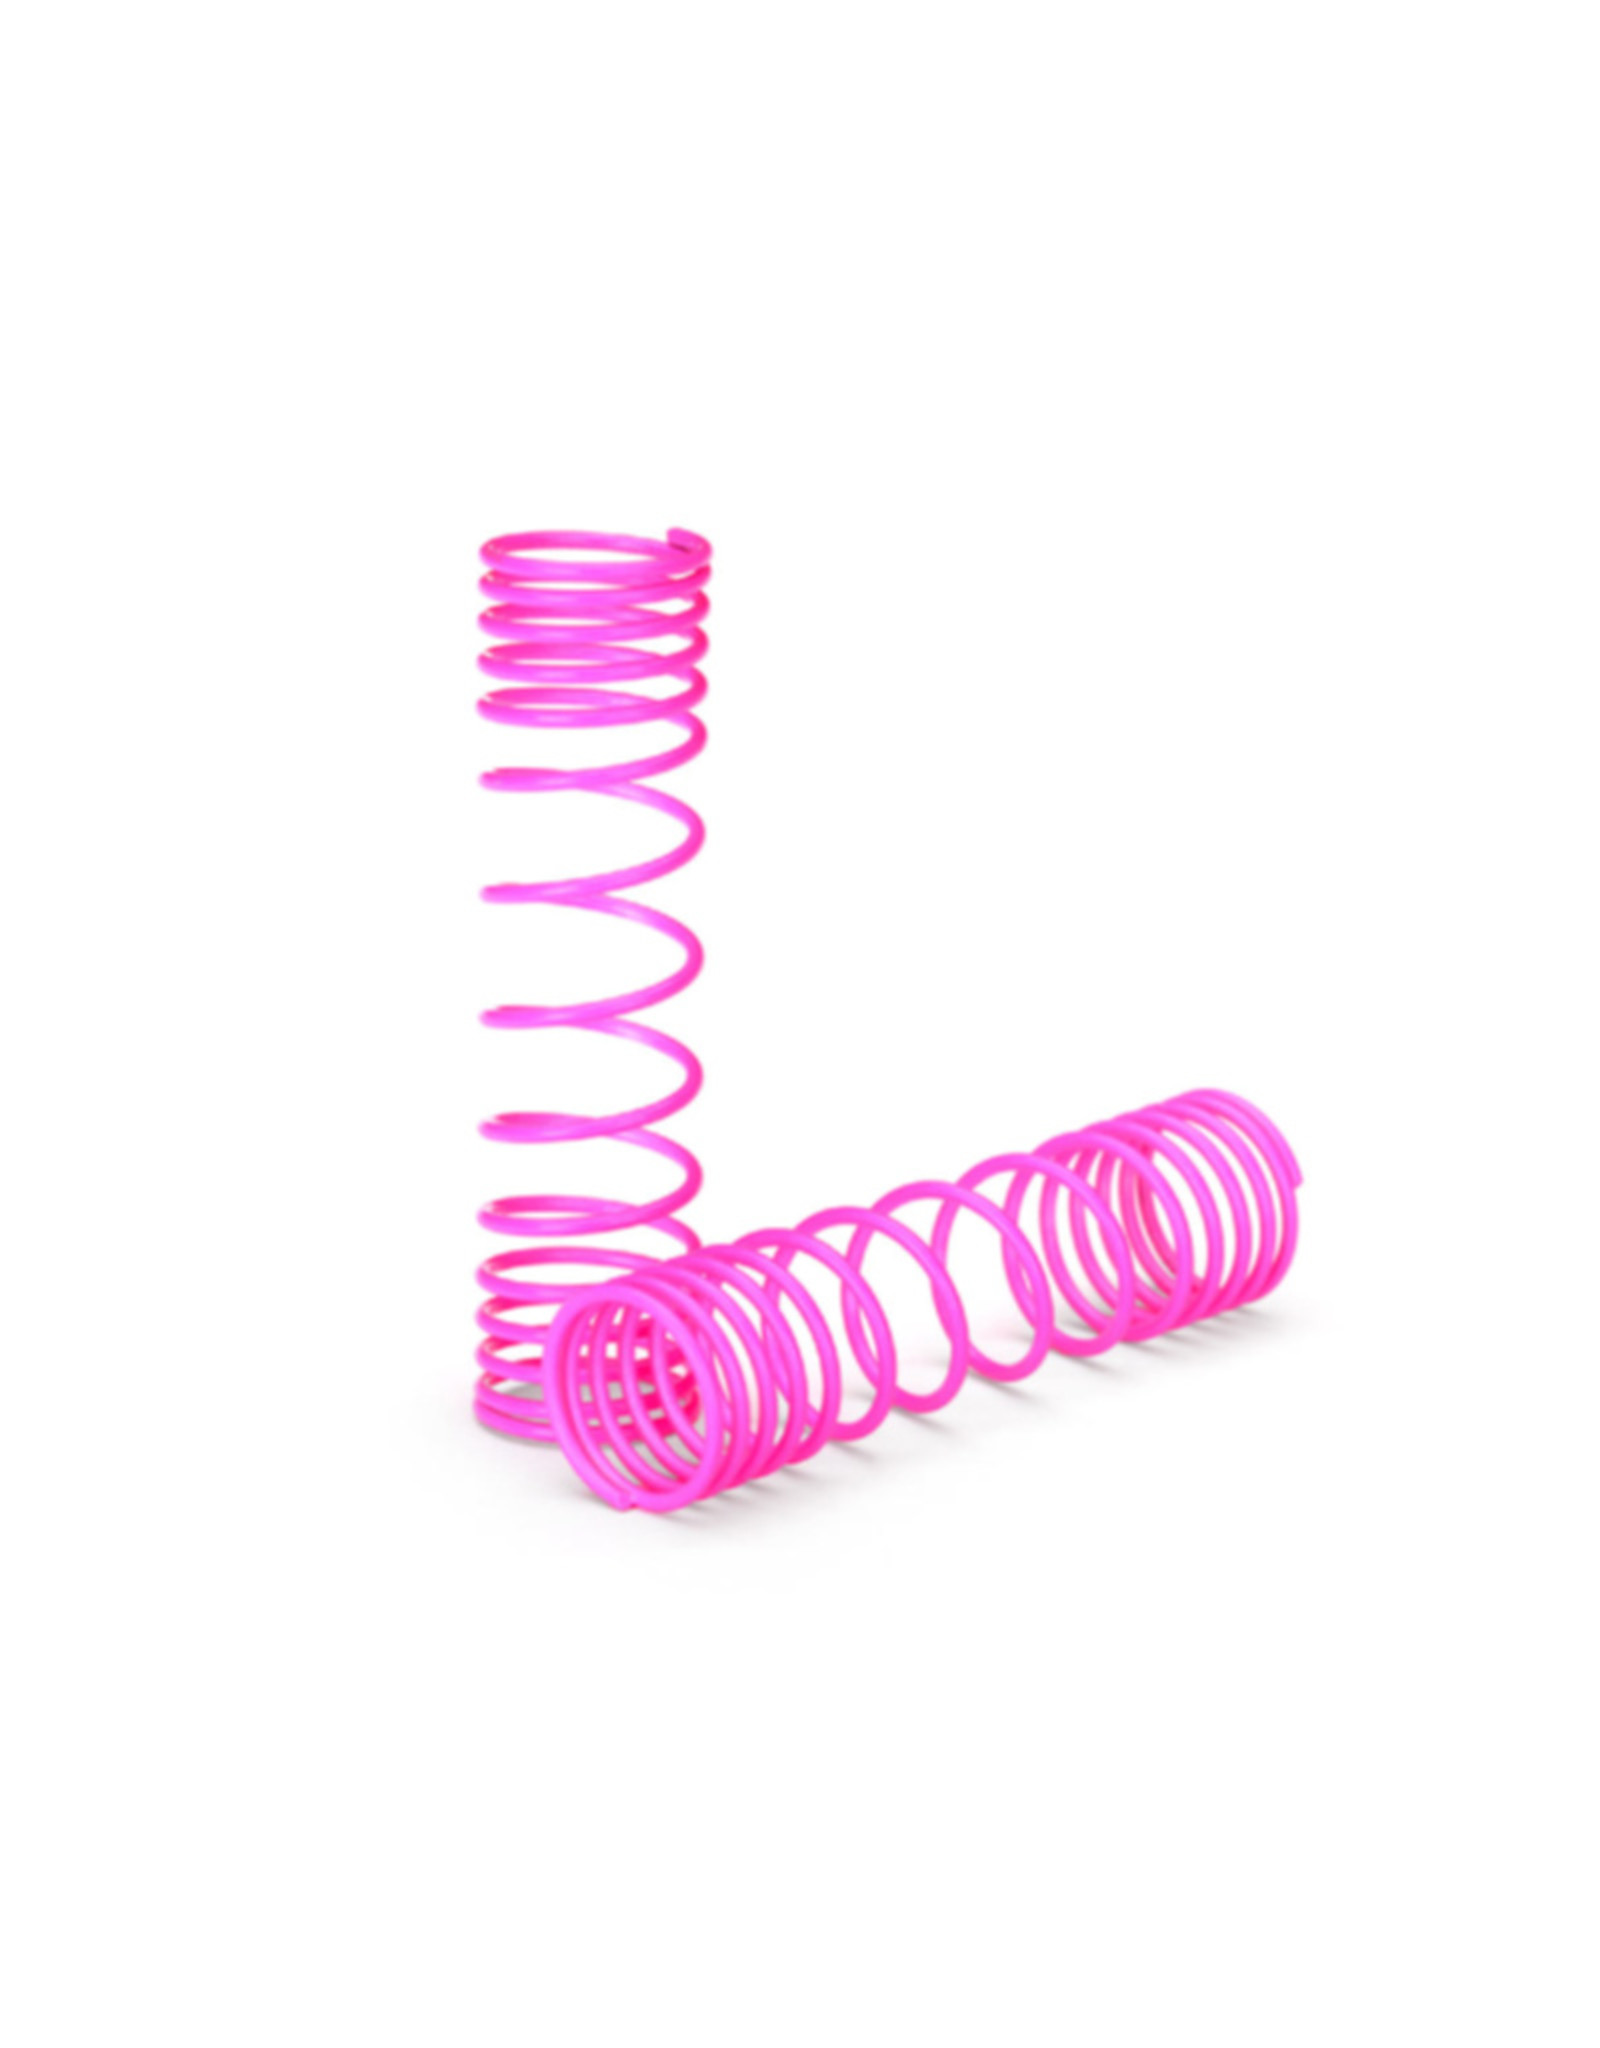 Traxxas TRA5858P Springs Rear Pink (progressive rate) (2)